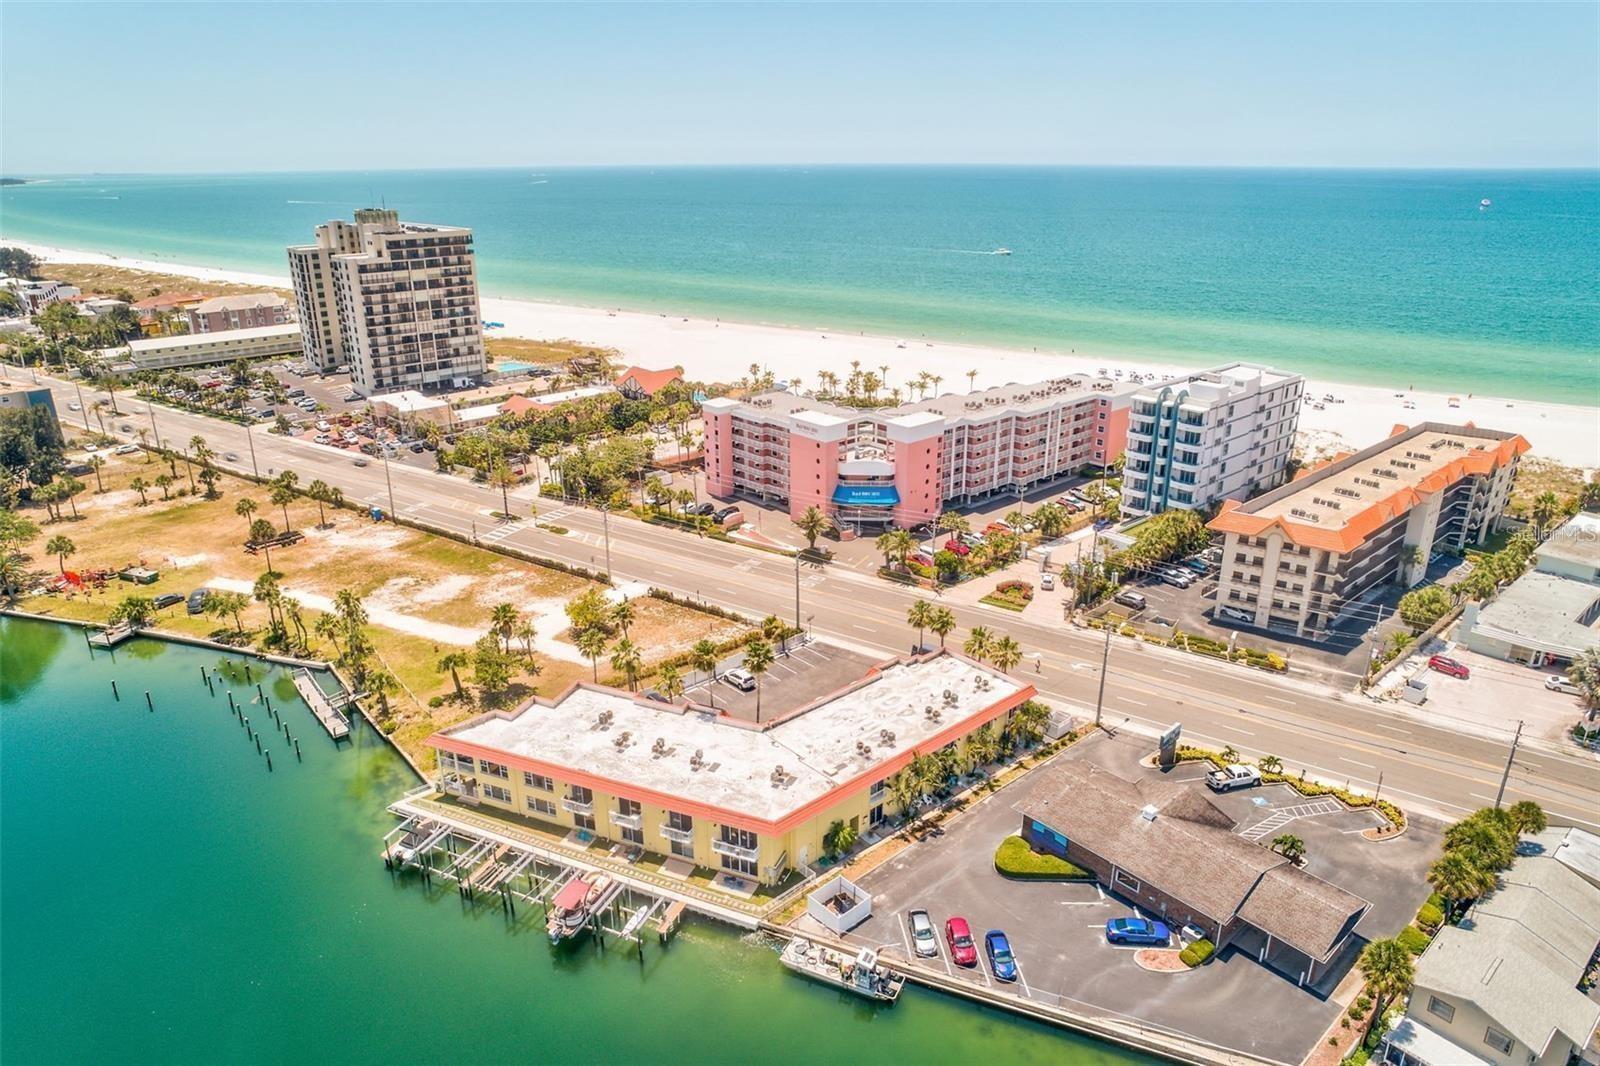 Property Image for 4103 Gulf Boulevard 205